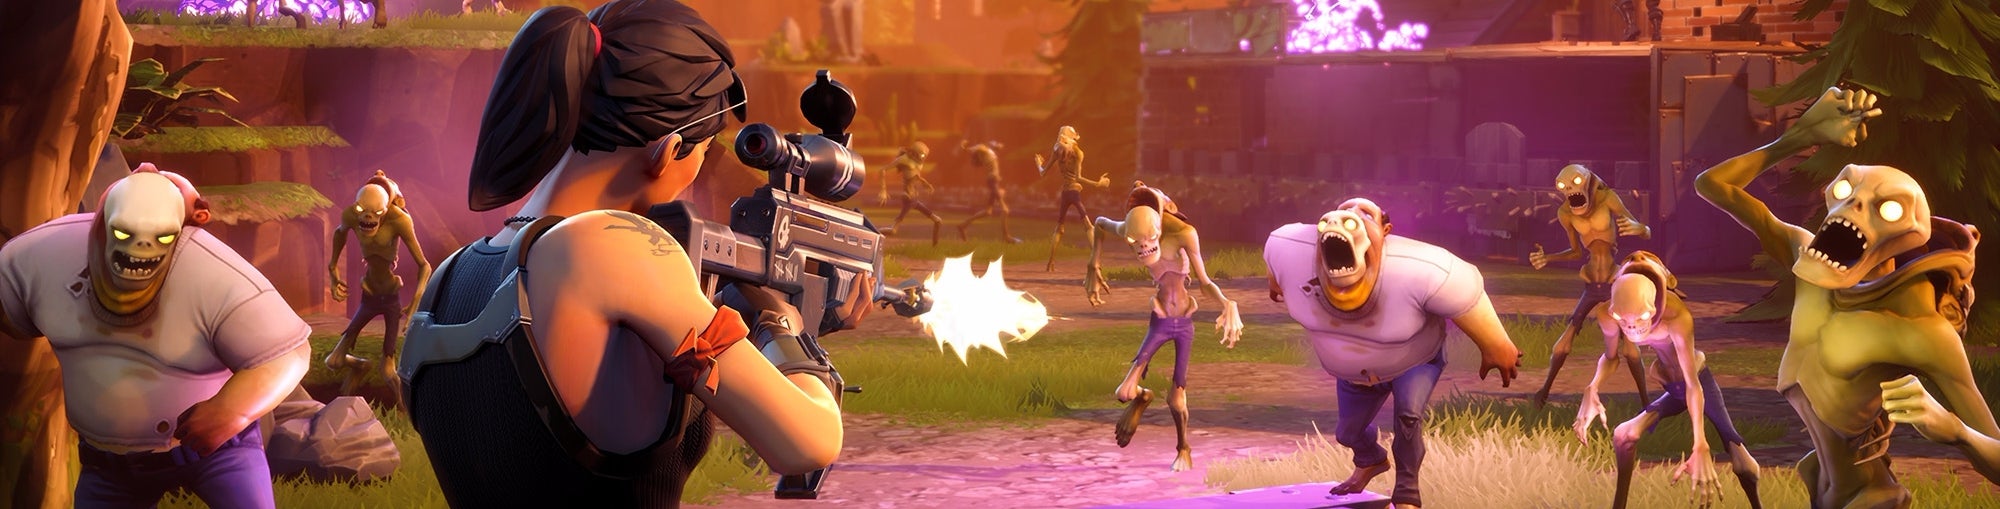 Image for Epic's Fortnite on UE4 plays better on Xbox One